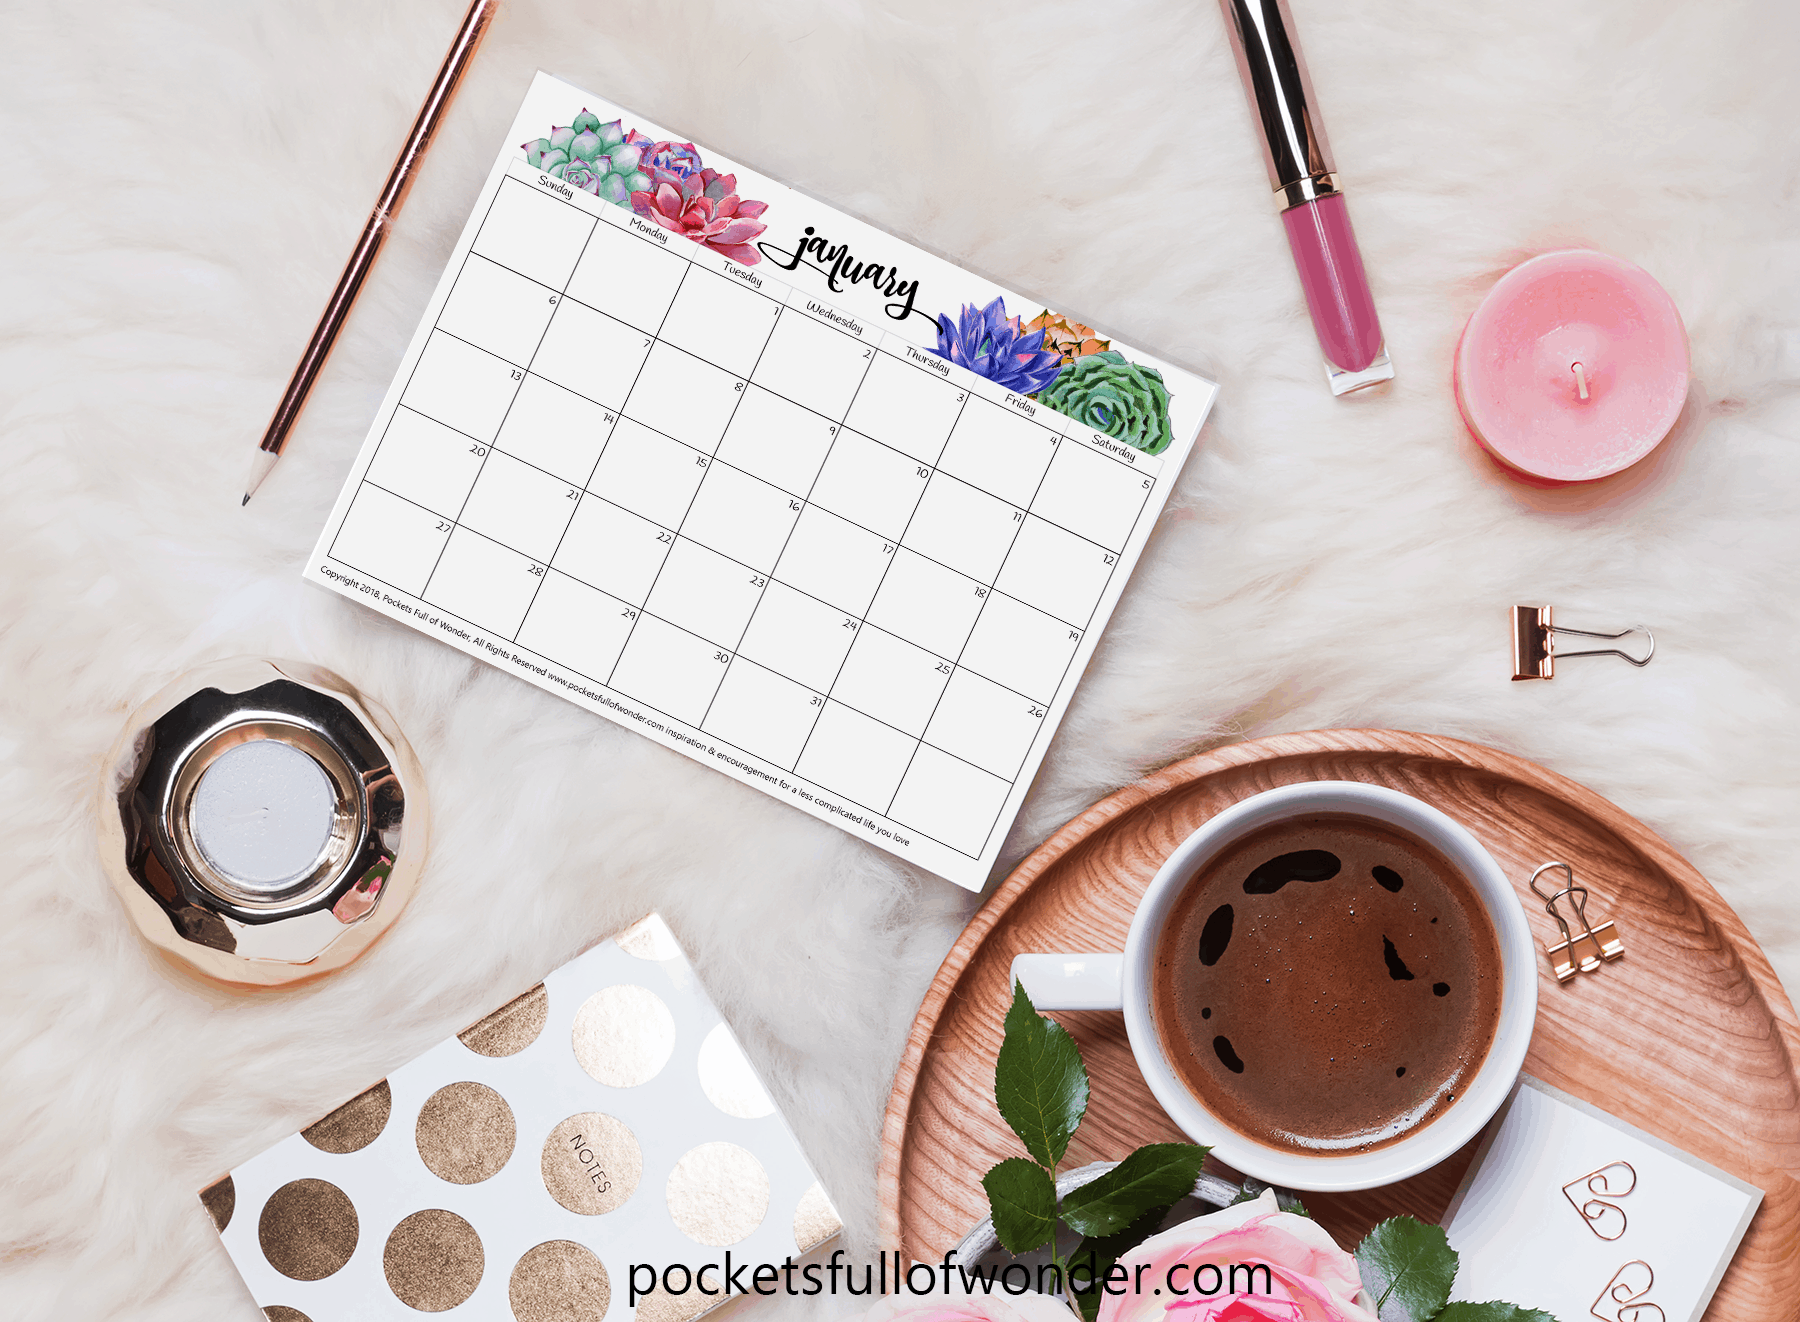 This printable watercolor succulent themed calendar is EVERYTHING! I need it now! 